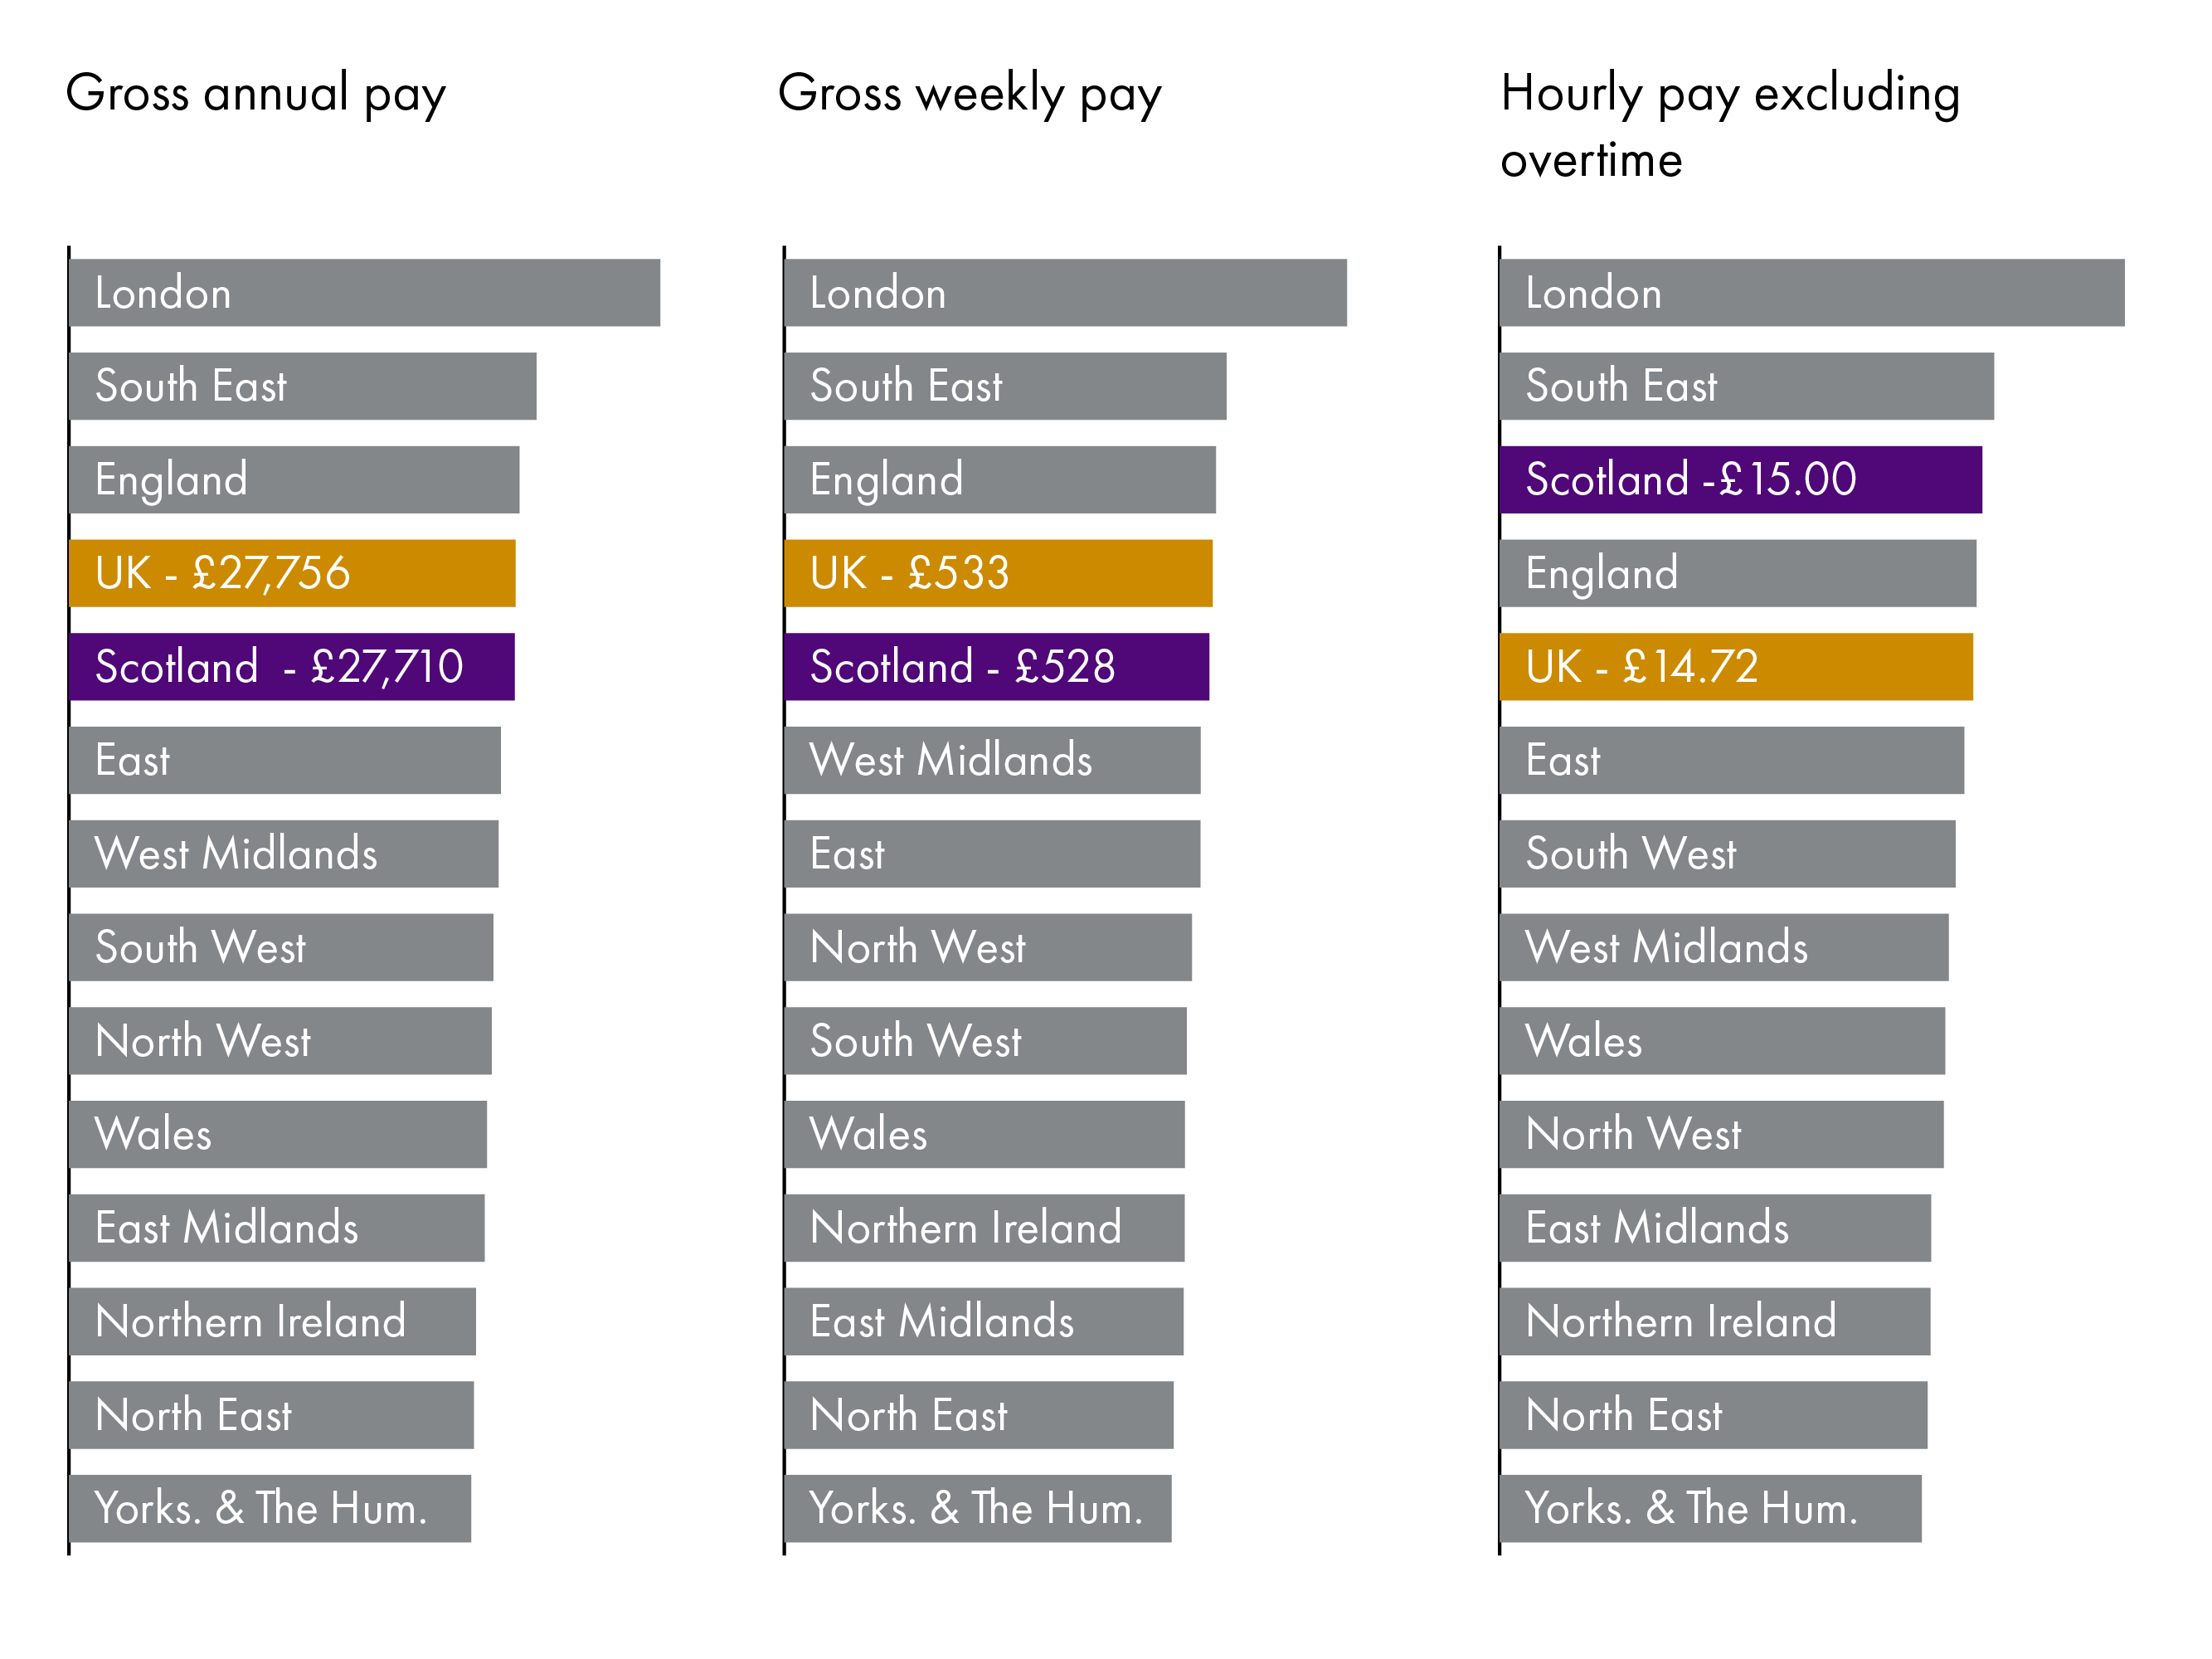 Three horizontal bar charts showing the value of pay for all employees by nation and region of the UK. One for gross annual pay, one for gross weekly pay and one for hourly pay excluding overtime. More detail can be found in the text below.